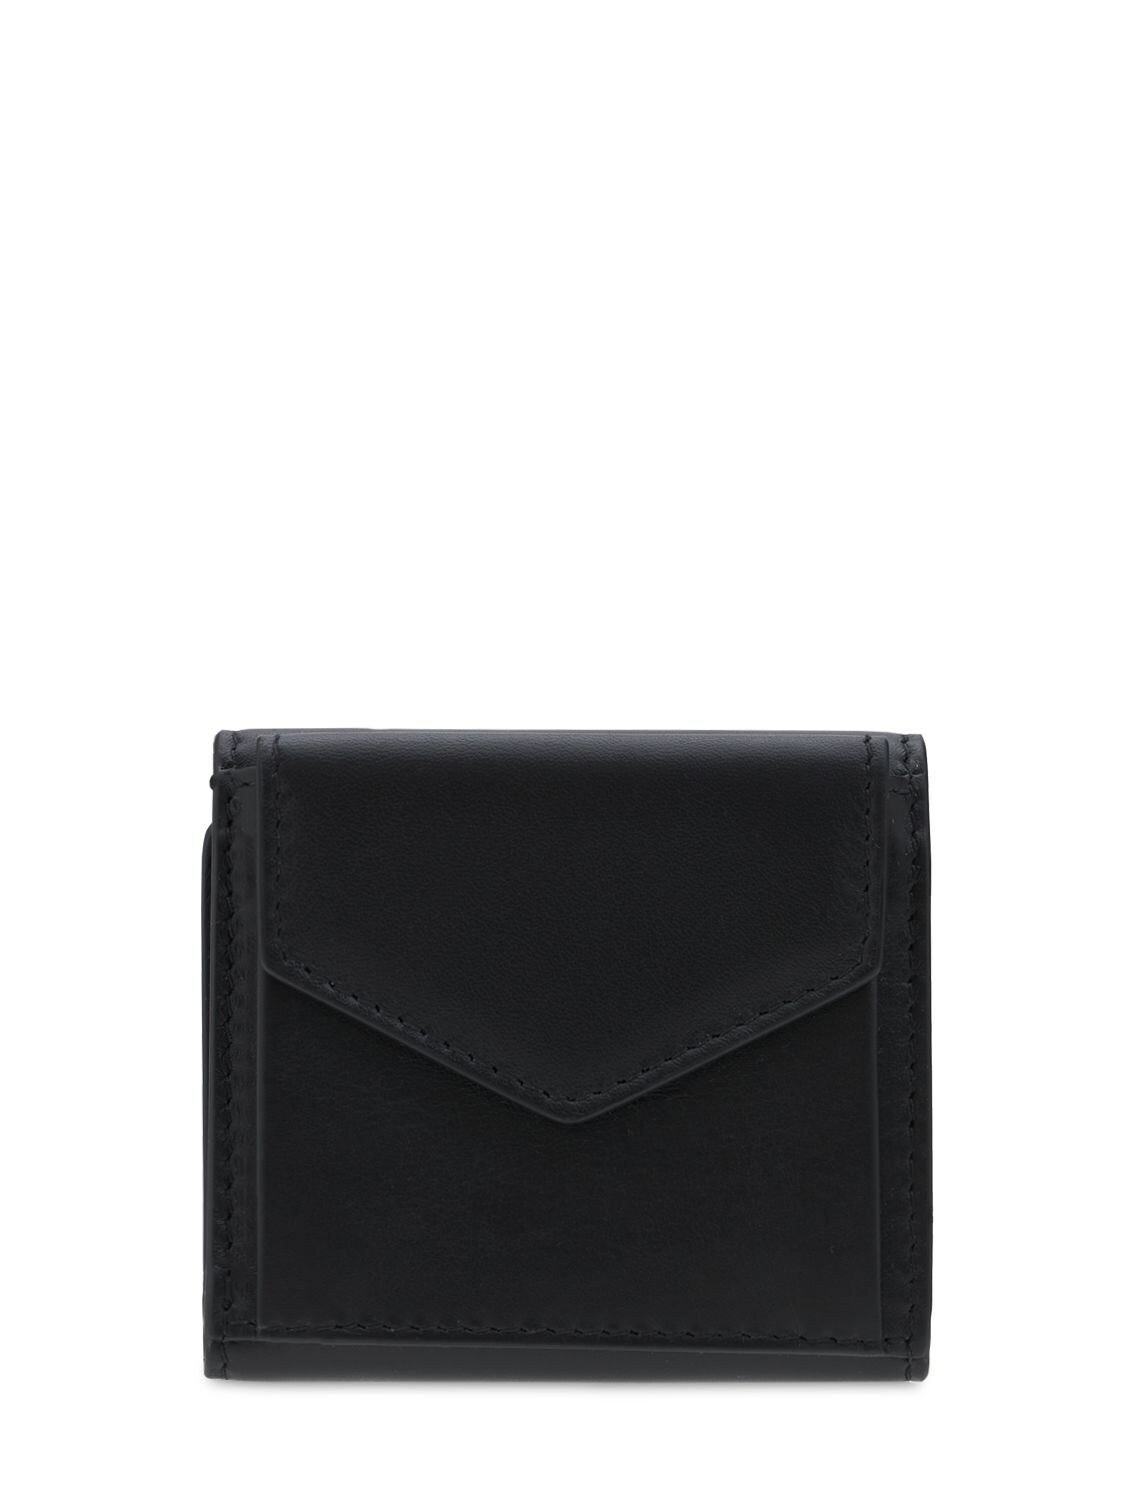 Maison Margiela Snap Compact Soft Leather Wallet In 黑色